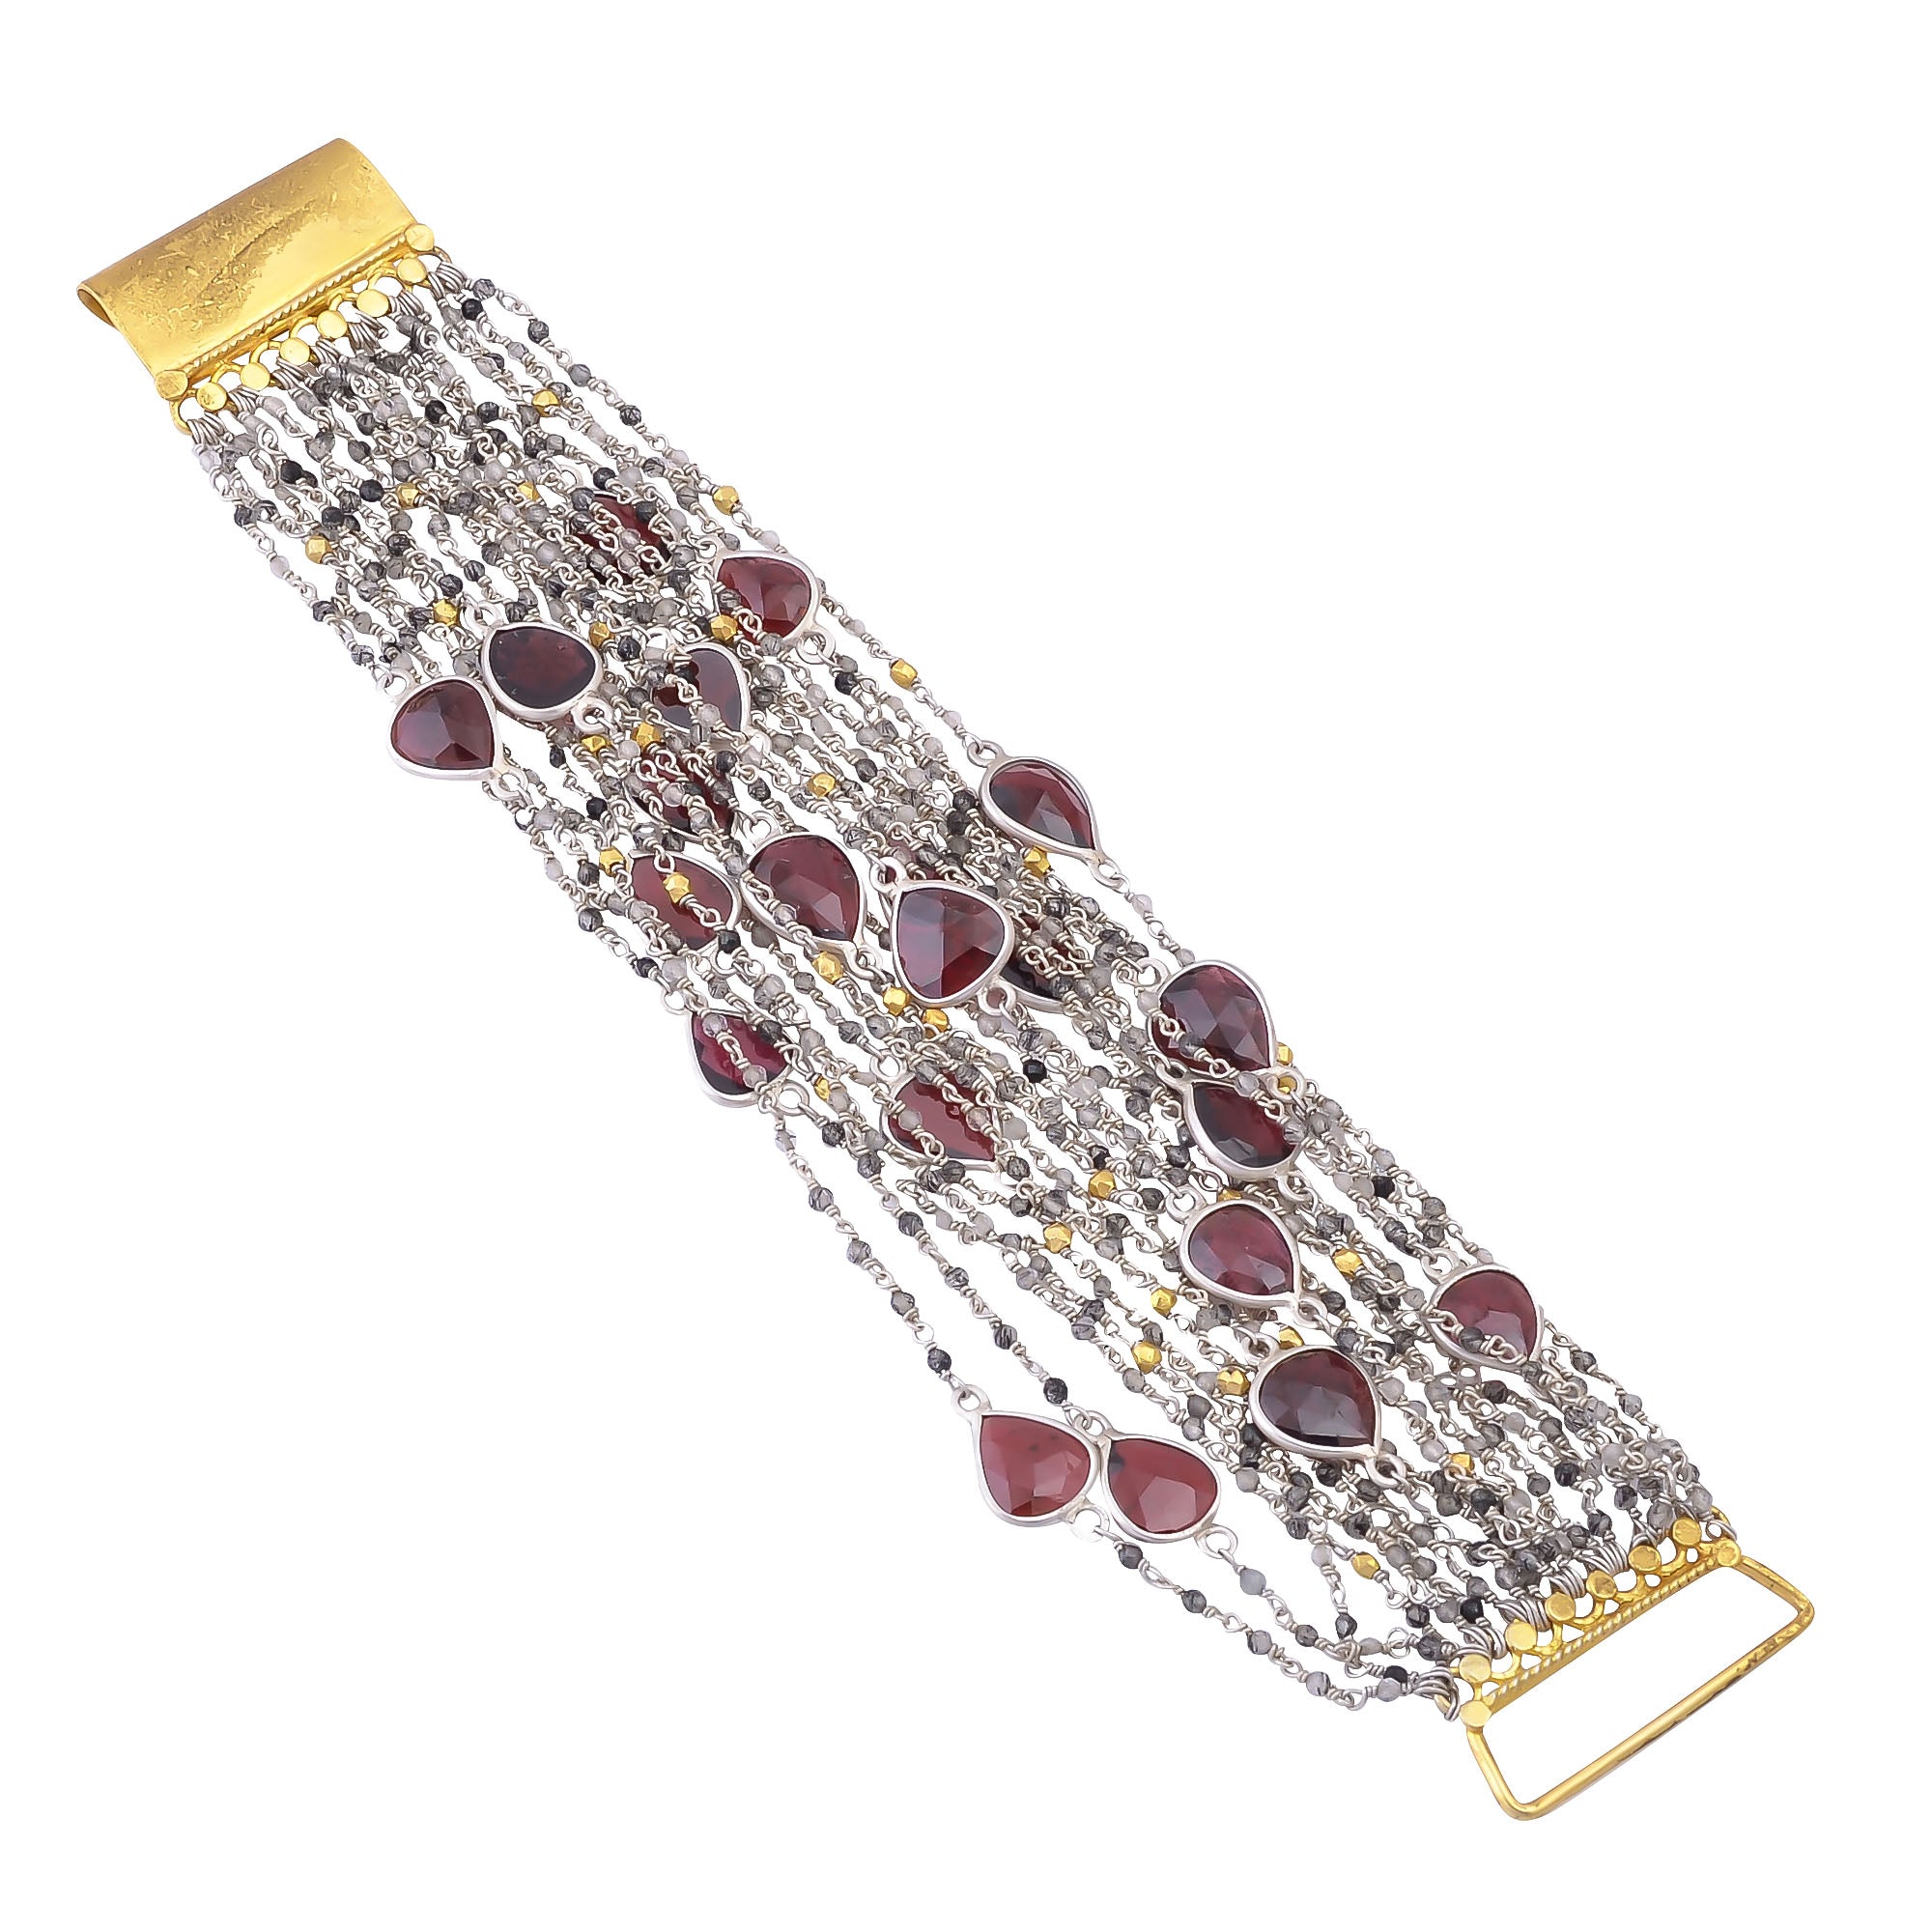 Buy Indian Handcrafted Silver Gold Plated Rotile/garnet Bunch Bracelet